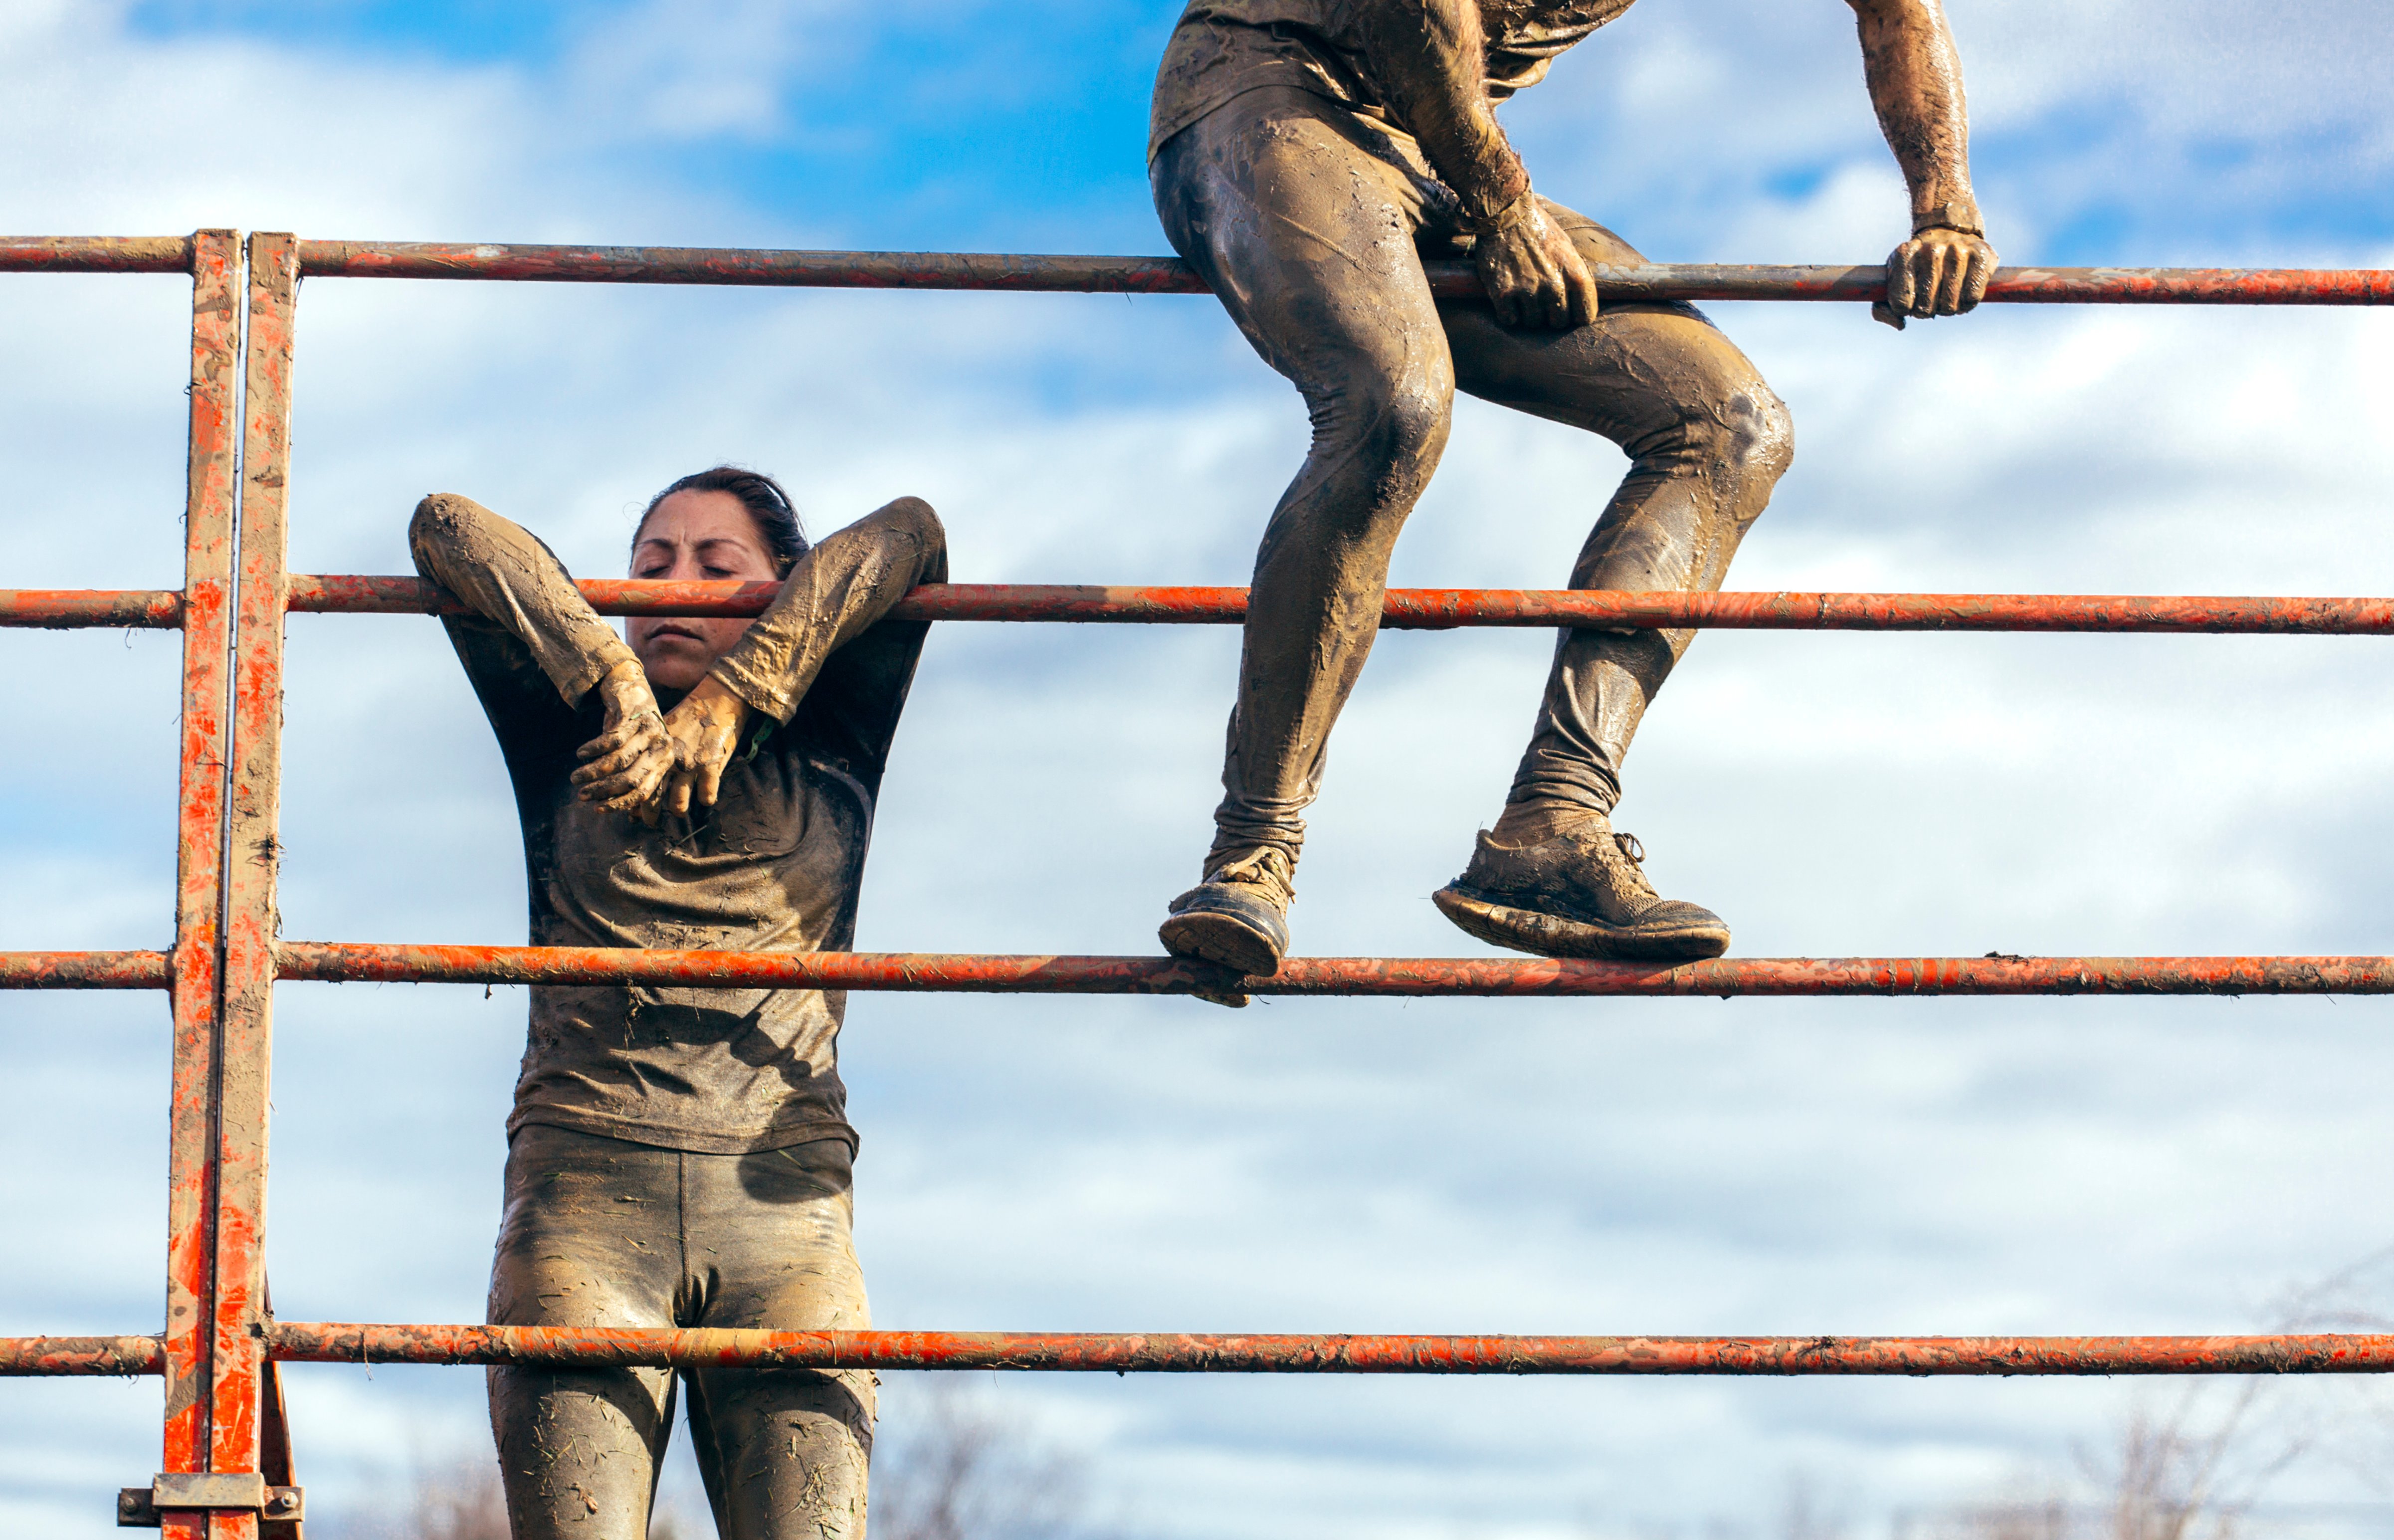 Participants in extreme obstacle race climbing over hurdle